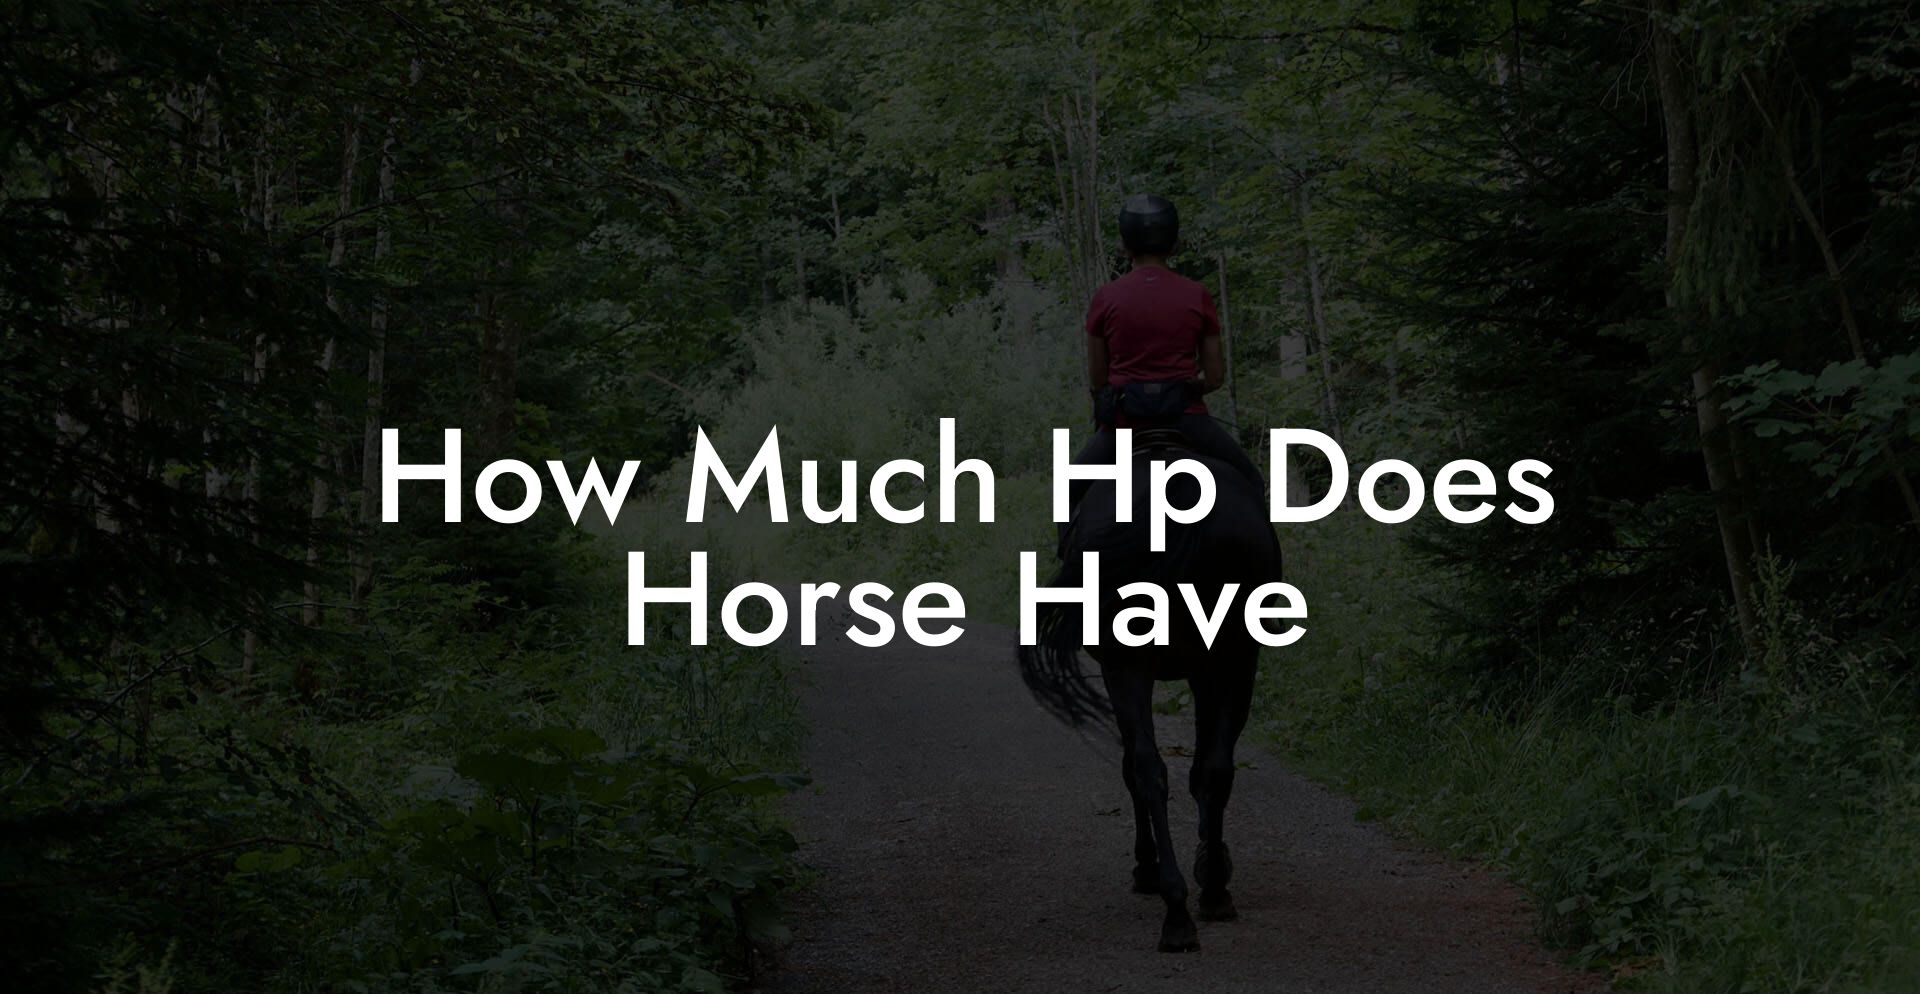 How Much Hp Does Horse Have